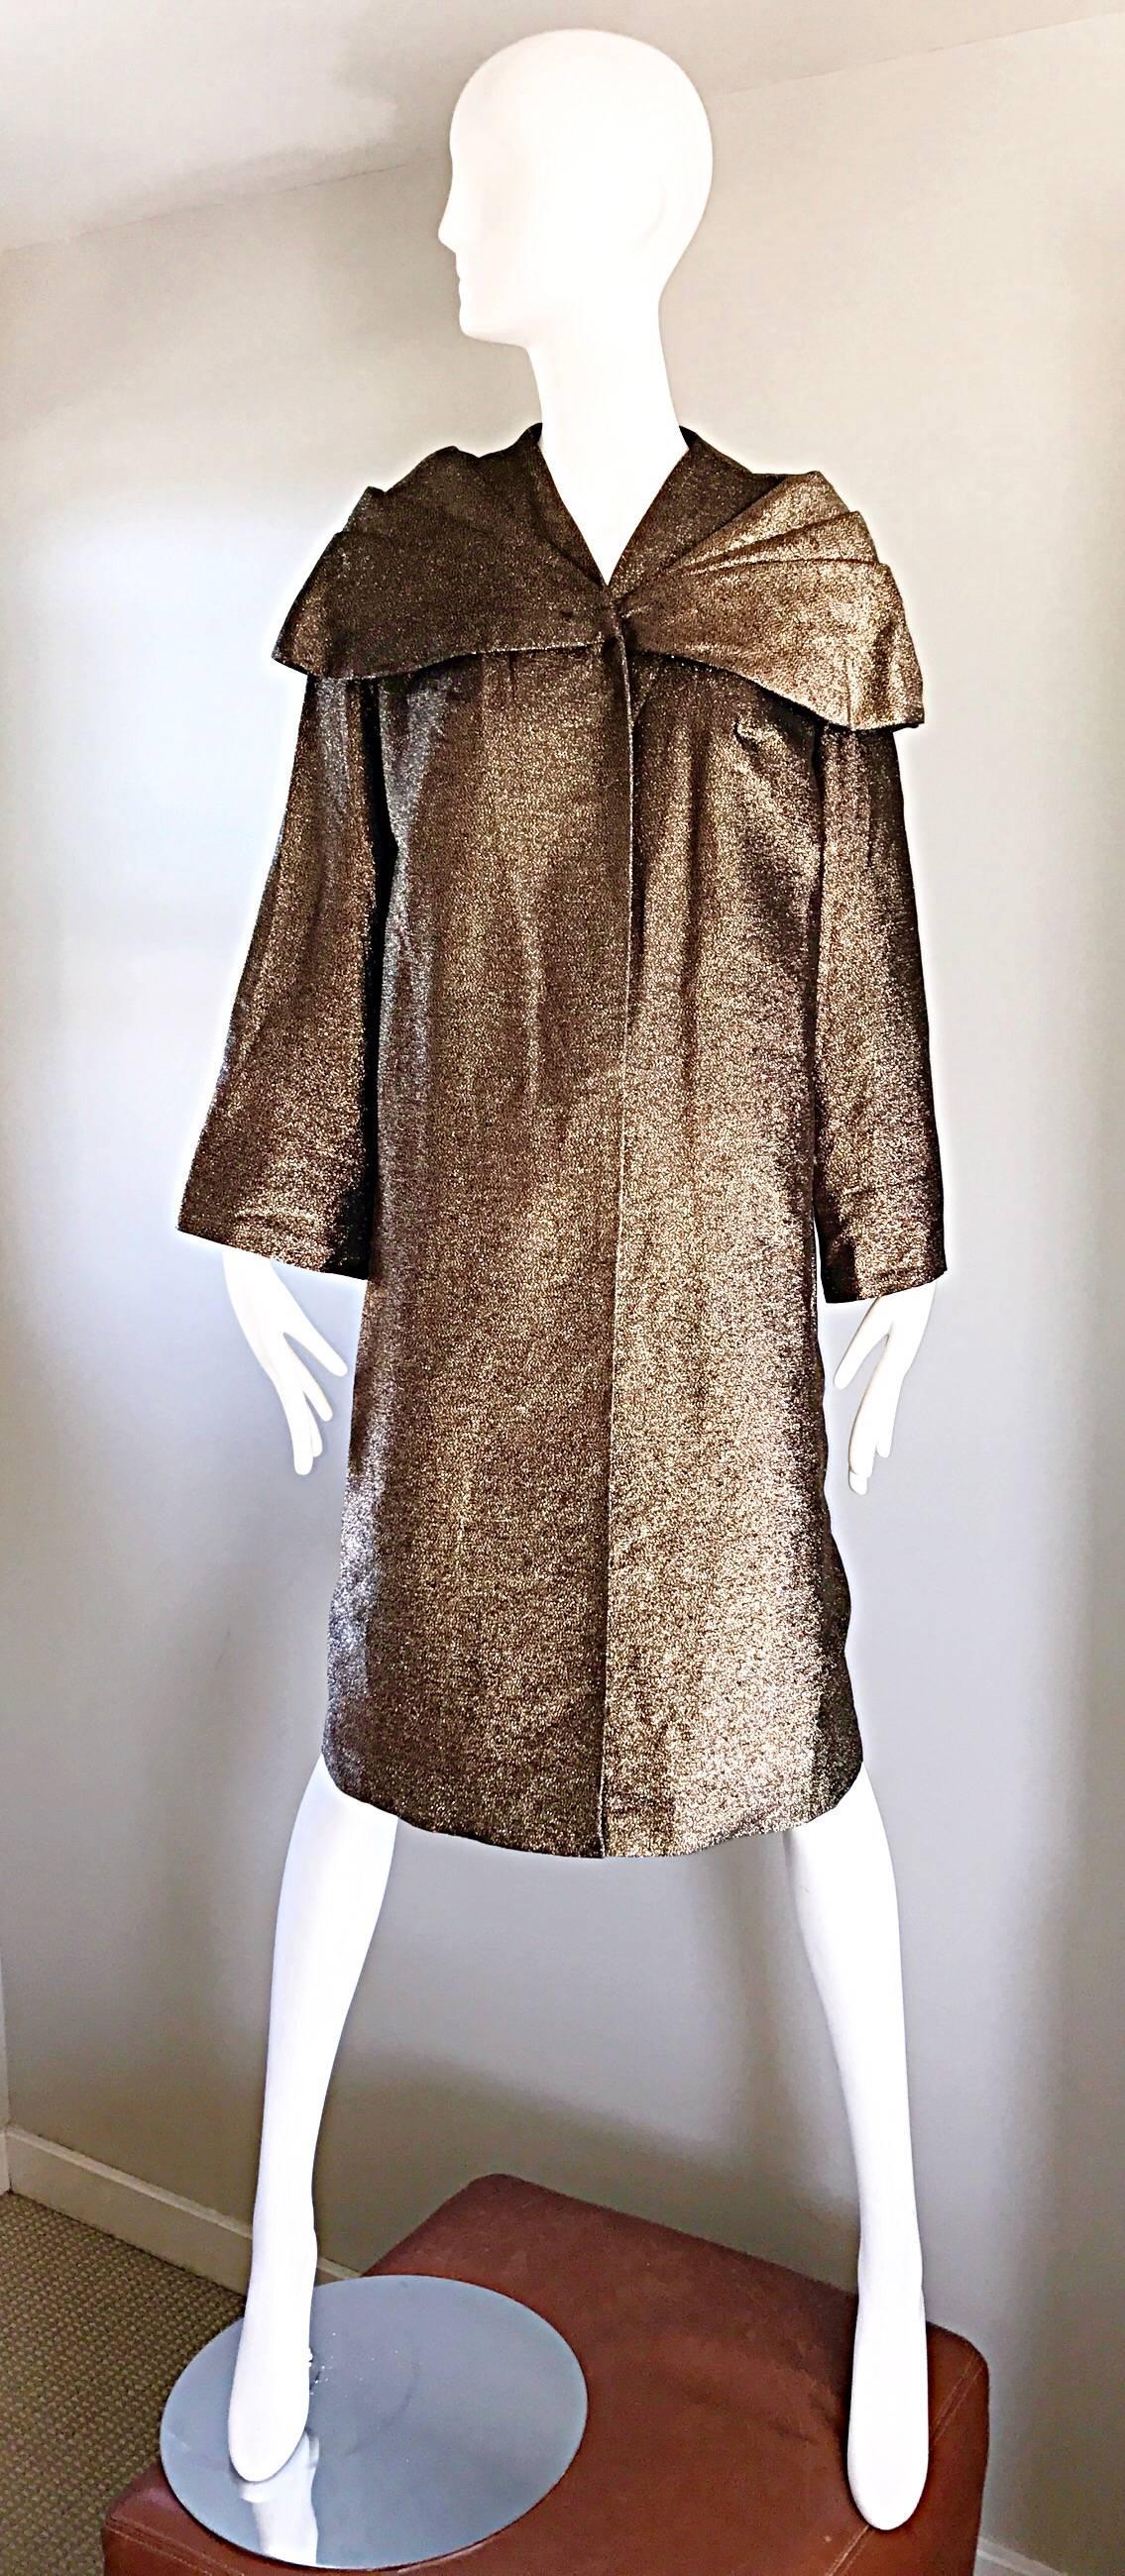 Sensational vintage 1950s bronze swing opera jacket! Avant Garde oversized collar. Couture quality, with excellent workmanship, with heavy attention to detail. Hidden hook-and-eye closure at top neck. Fully lined. Great weight that will keep you